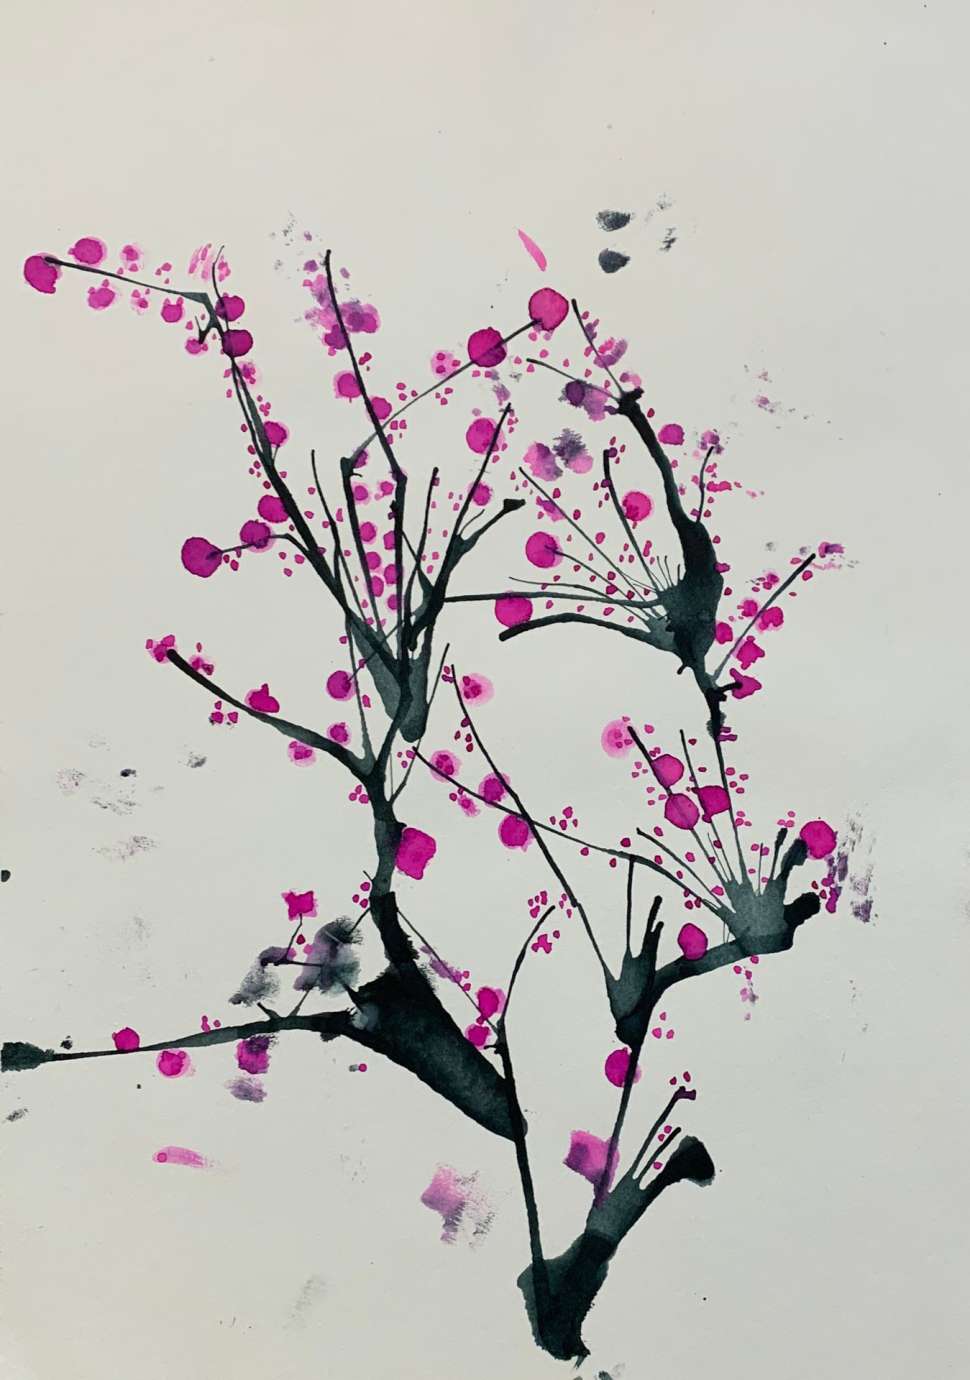 Black branches and small pink blossoms